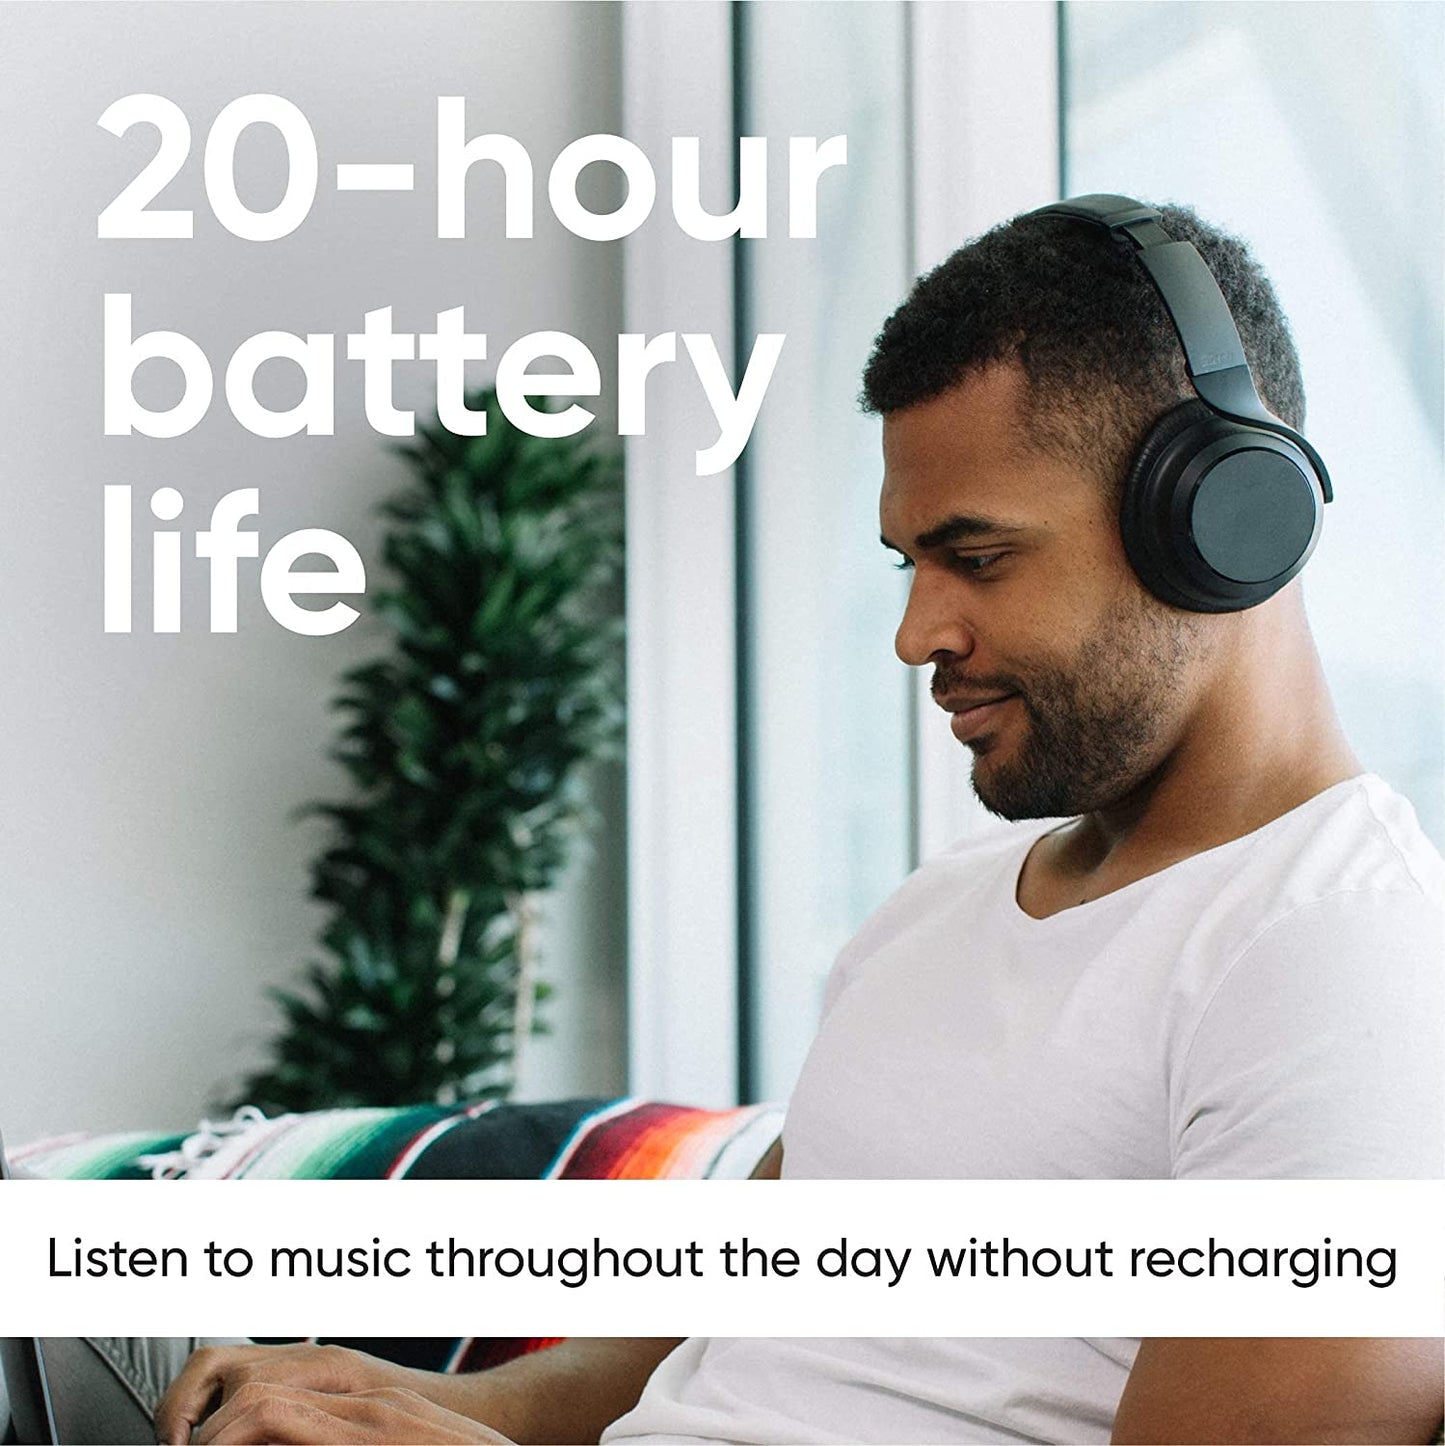 Person wearing noise canceling headphones. Text overlays says, "20 hour battery life."